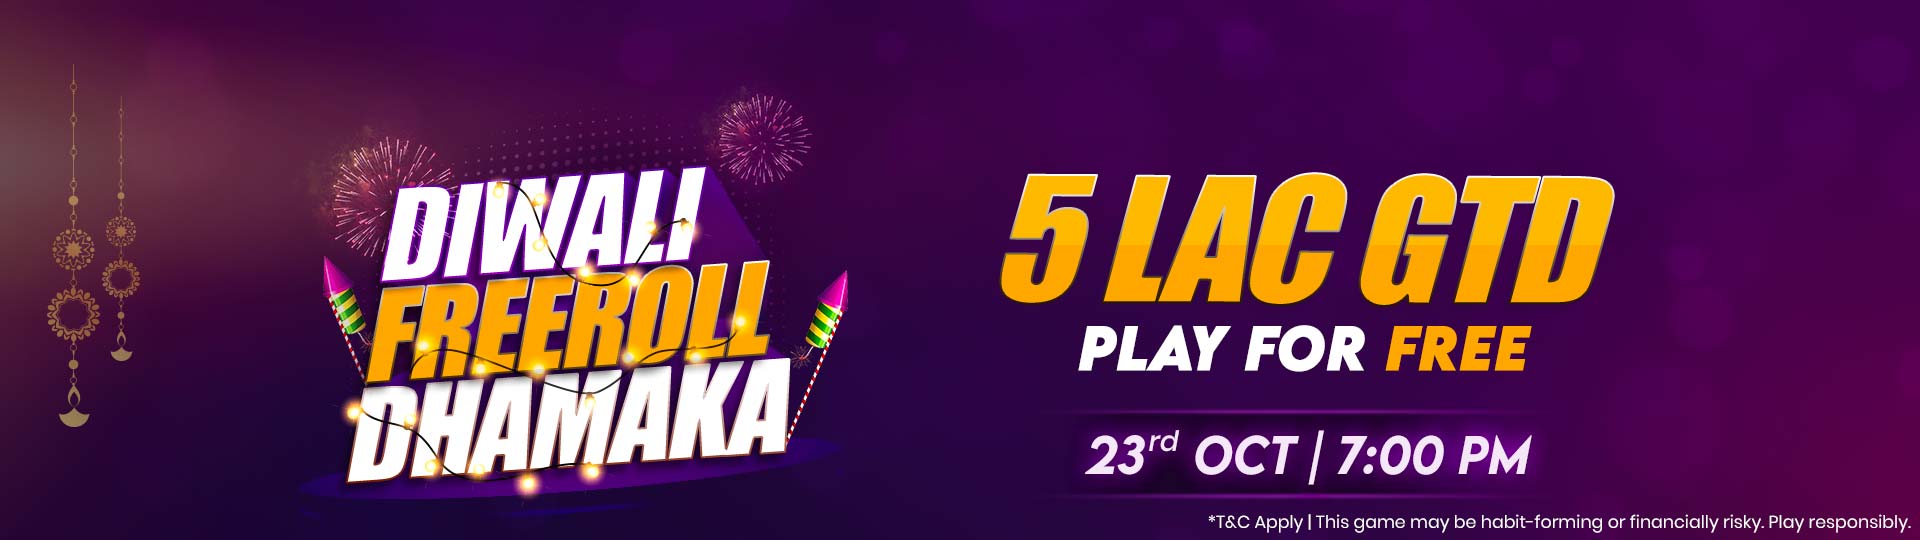 Play Diwali Freeroll Dhamaka for free and win from 5 Lac GTD on Adda52